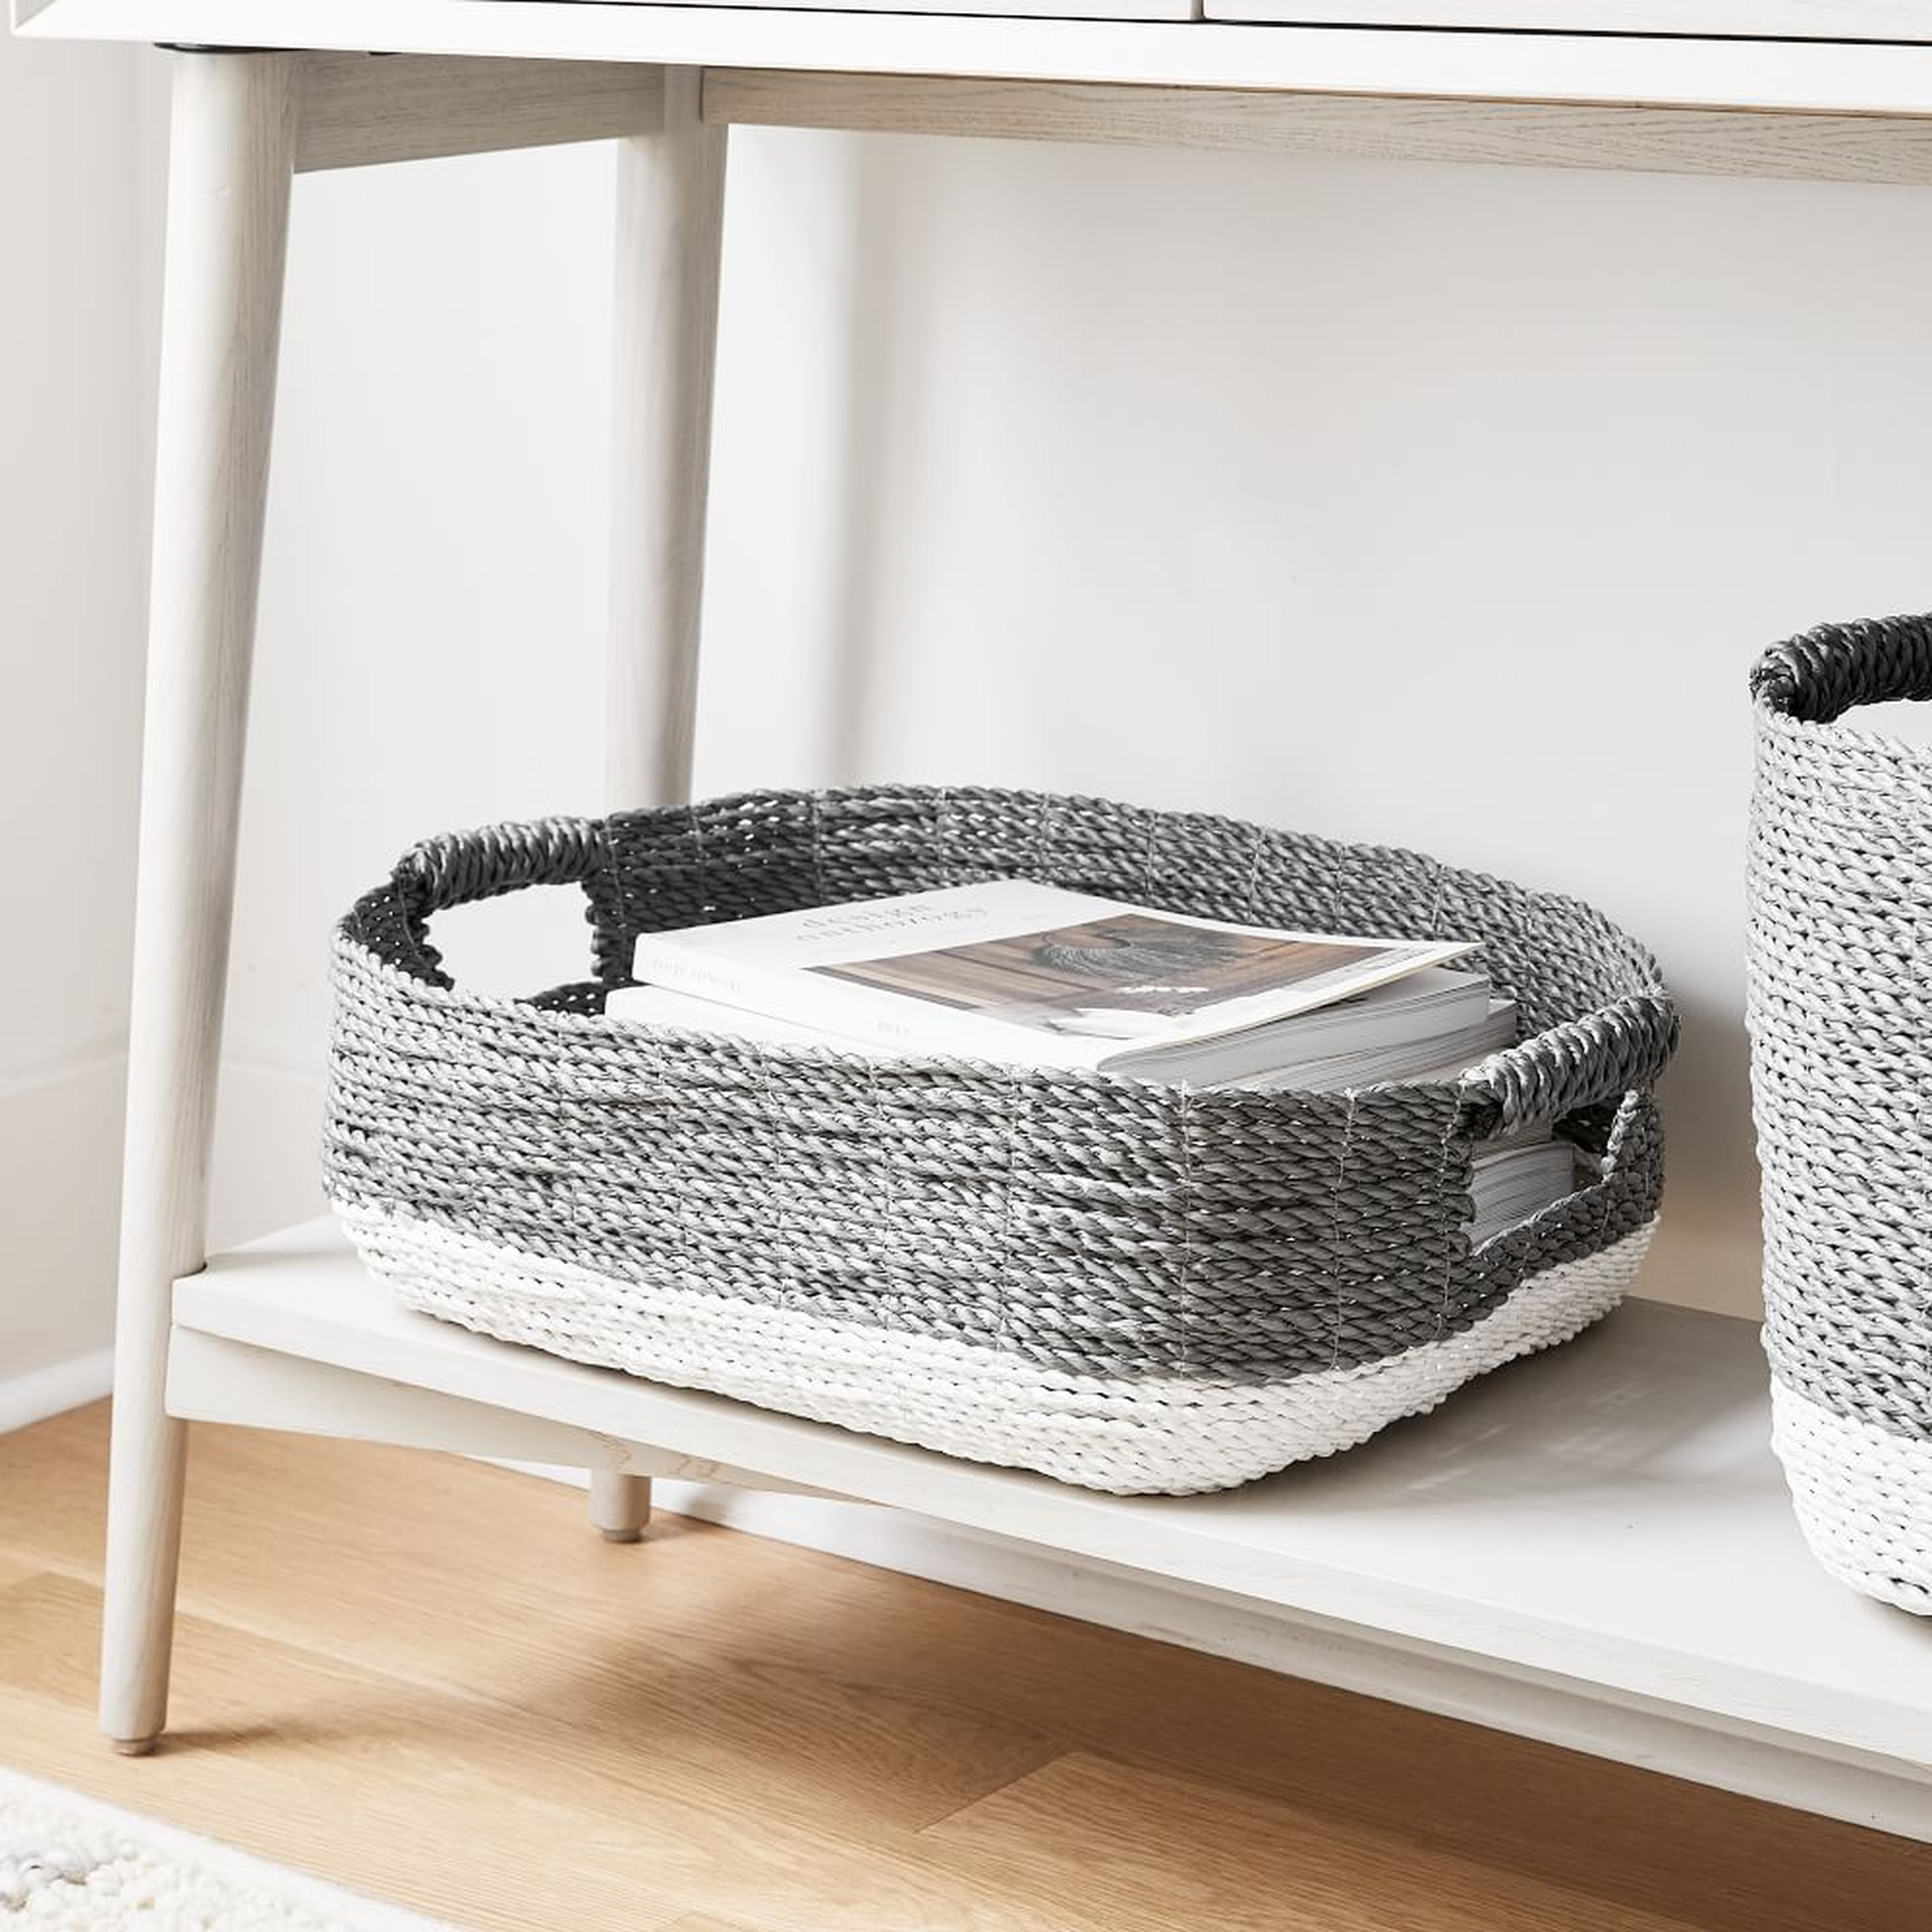 Two-Tone Woven Basket, Gray/White, Underbed - West Elm